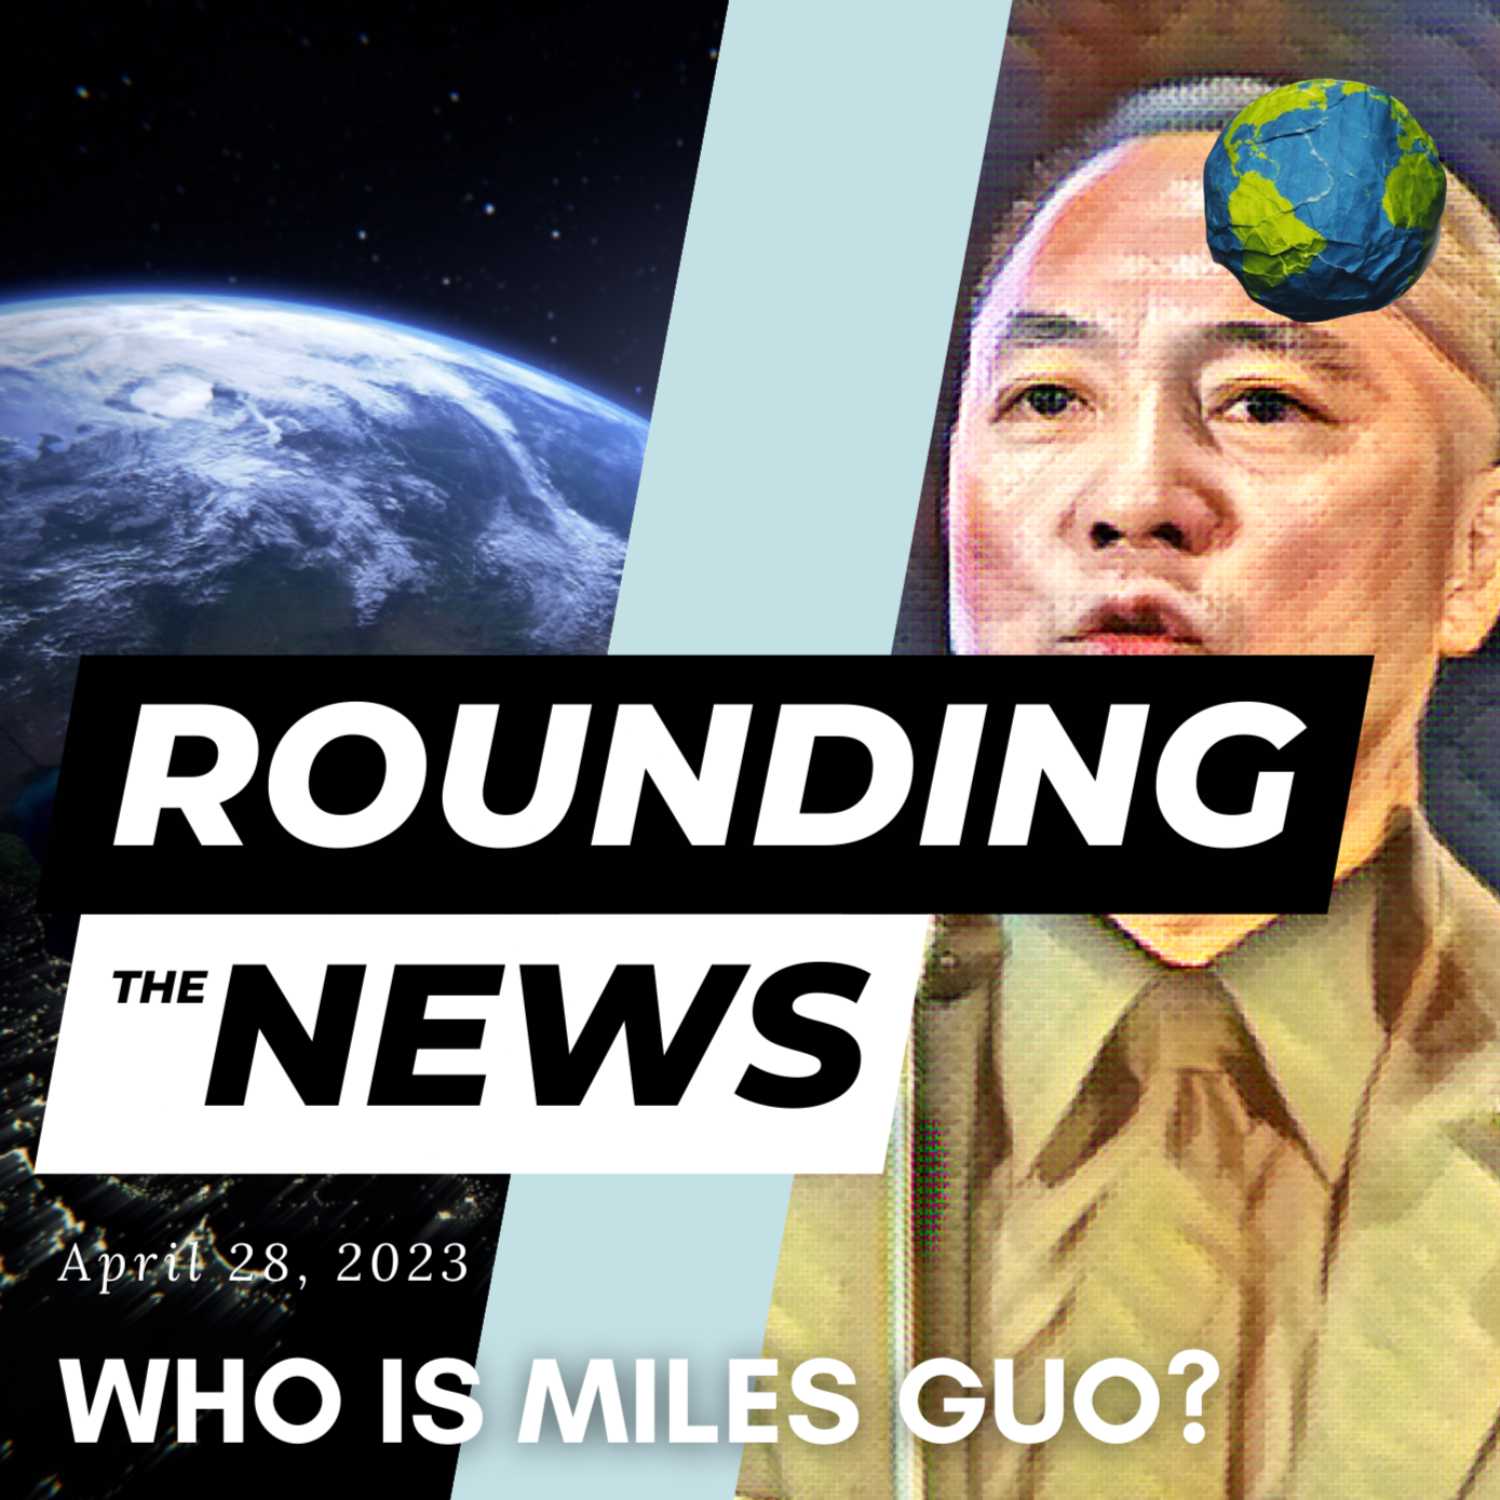 Who Is Miles Guo? - Rounding the News